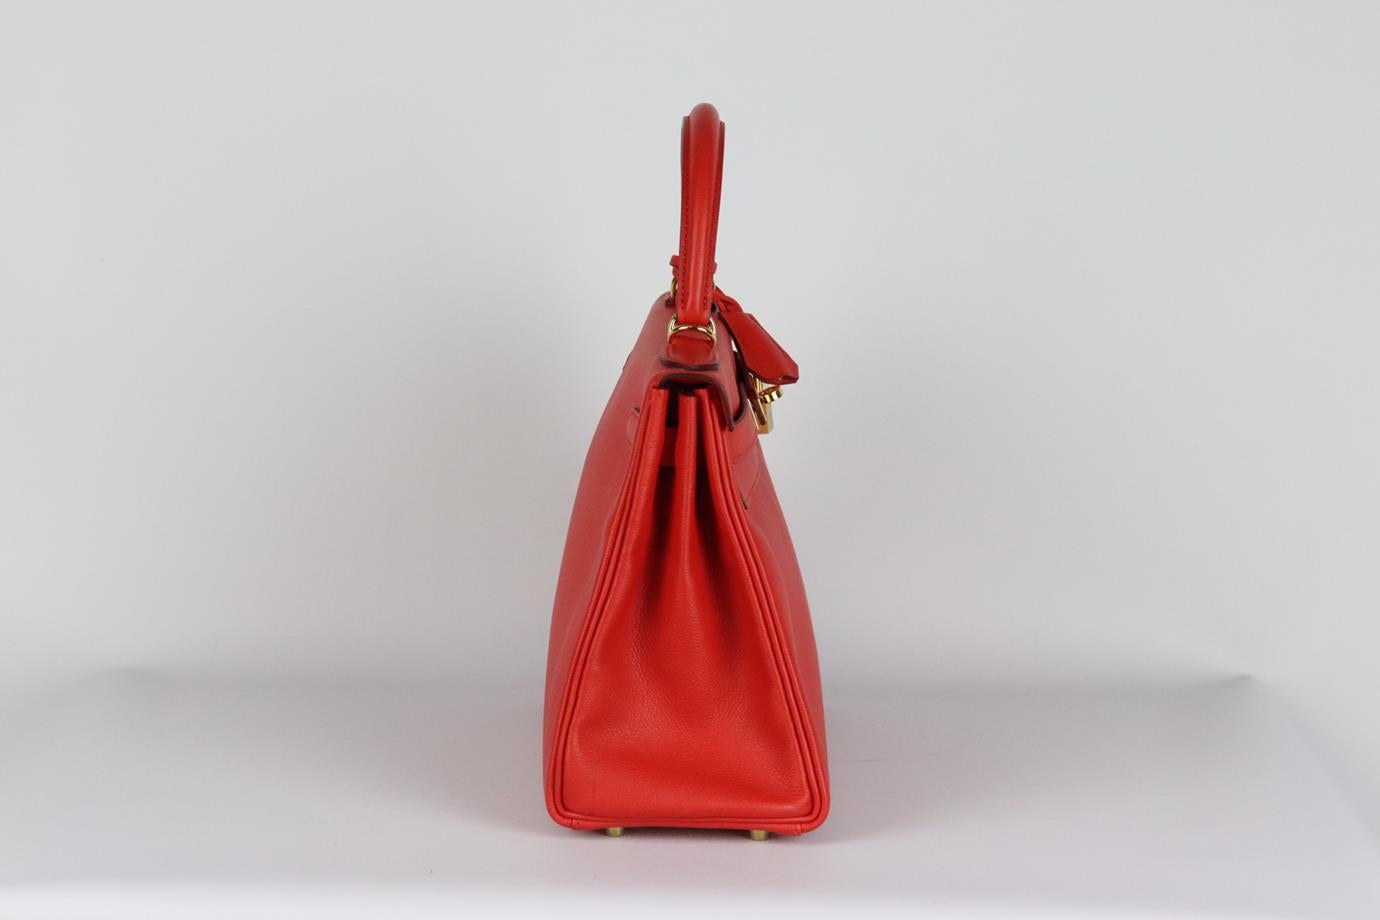 Hermès 2016 Kelly Retourne 28cm Evergrain leather bag. Made in France, this beautiful 2016 Hermès ‘Kelly’ 28cm handbag has been made from red tone ‘Evergreen’ leather exterior in ‘Rouge Casaque’ with matching interior, this piece is decorated with